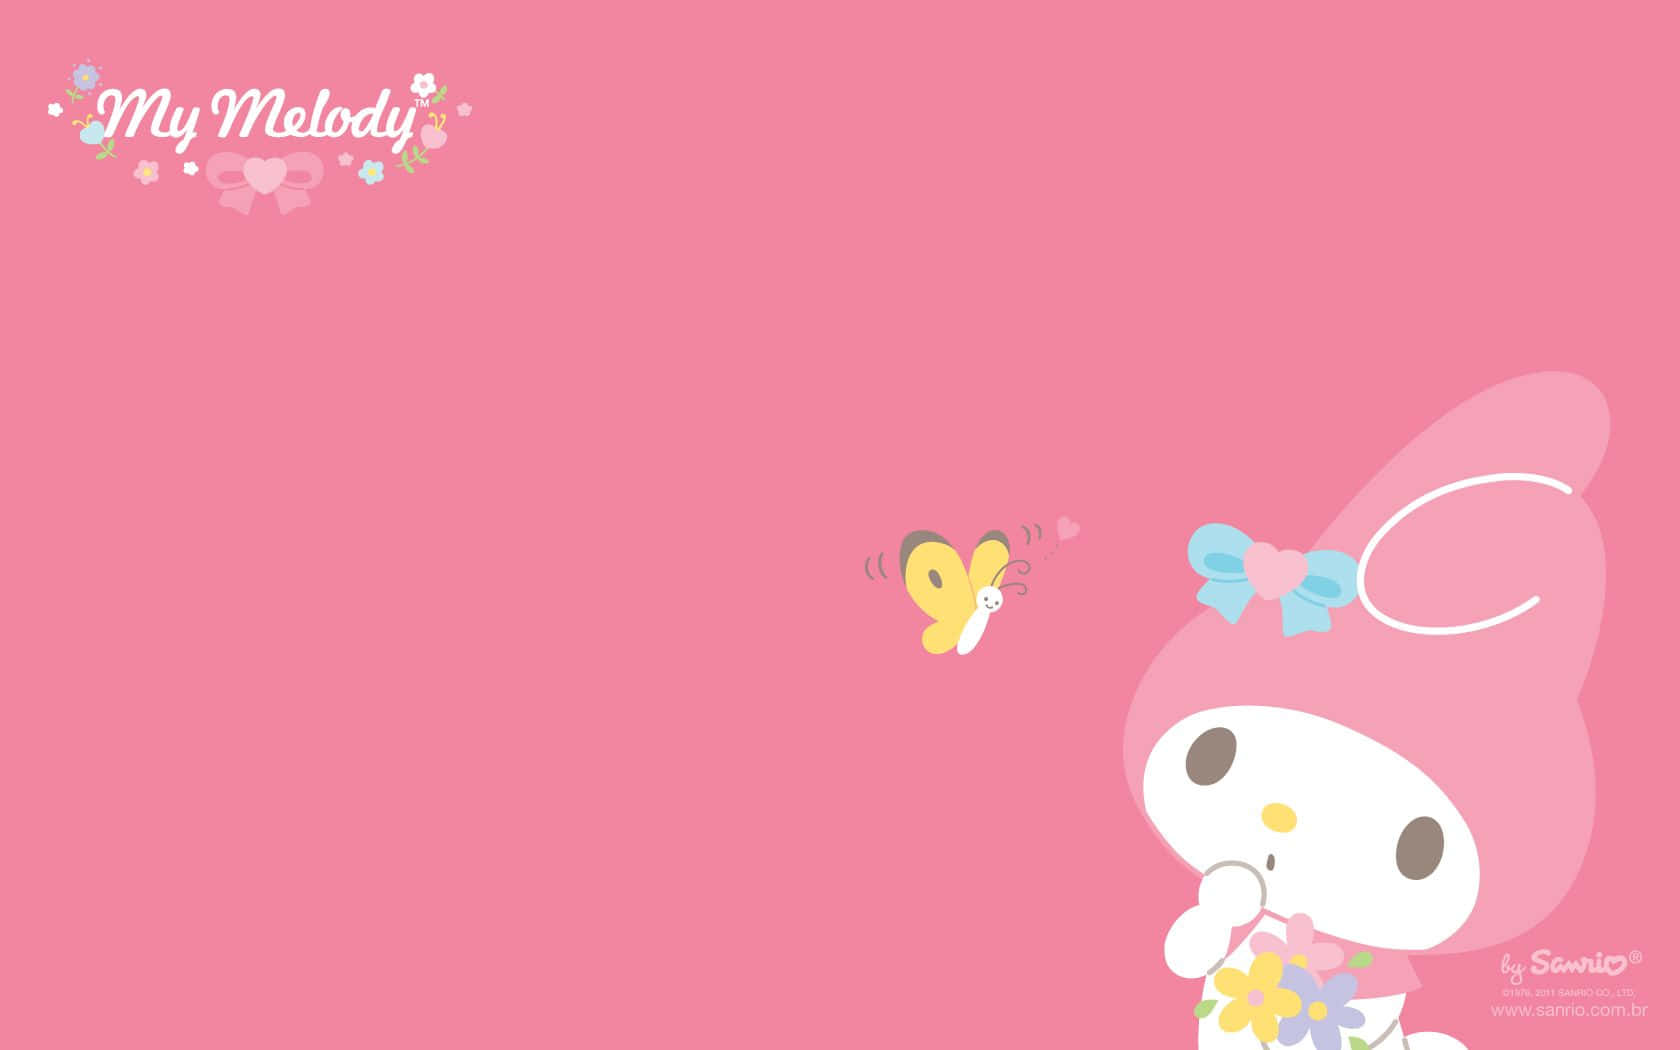 Get ready to explore the digital world with My Melody laptops! Wallpaper